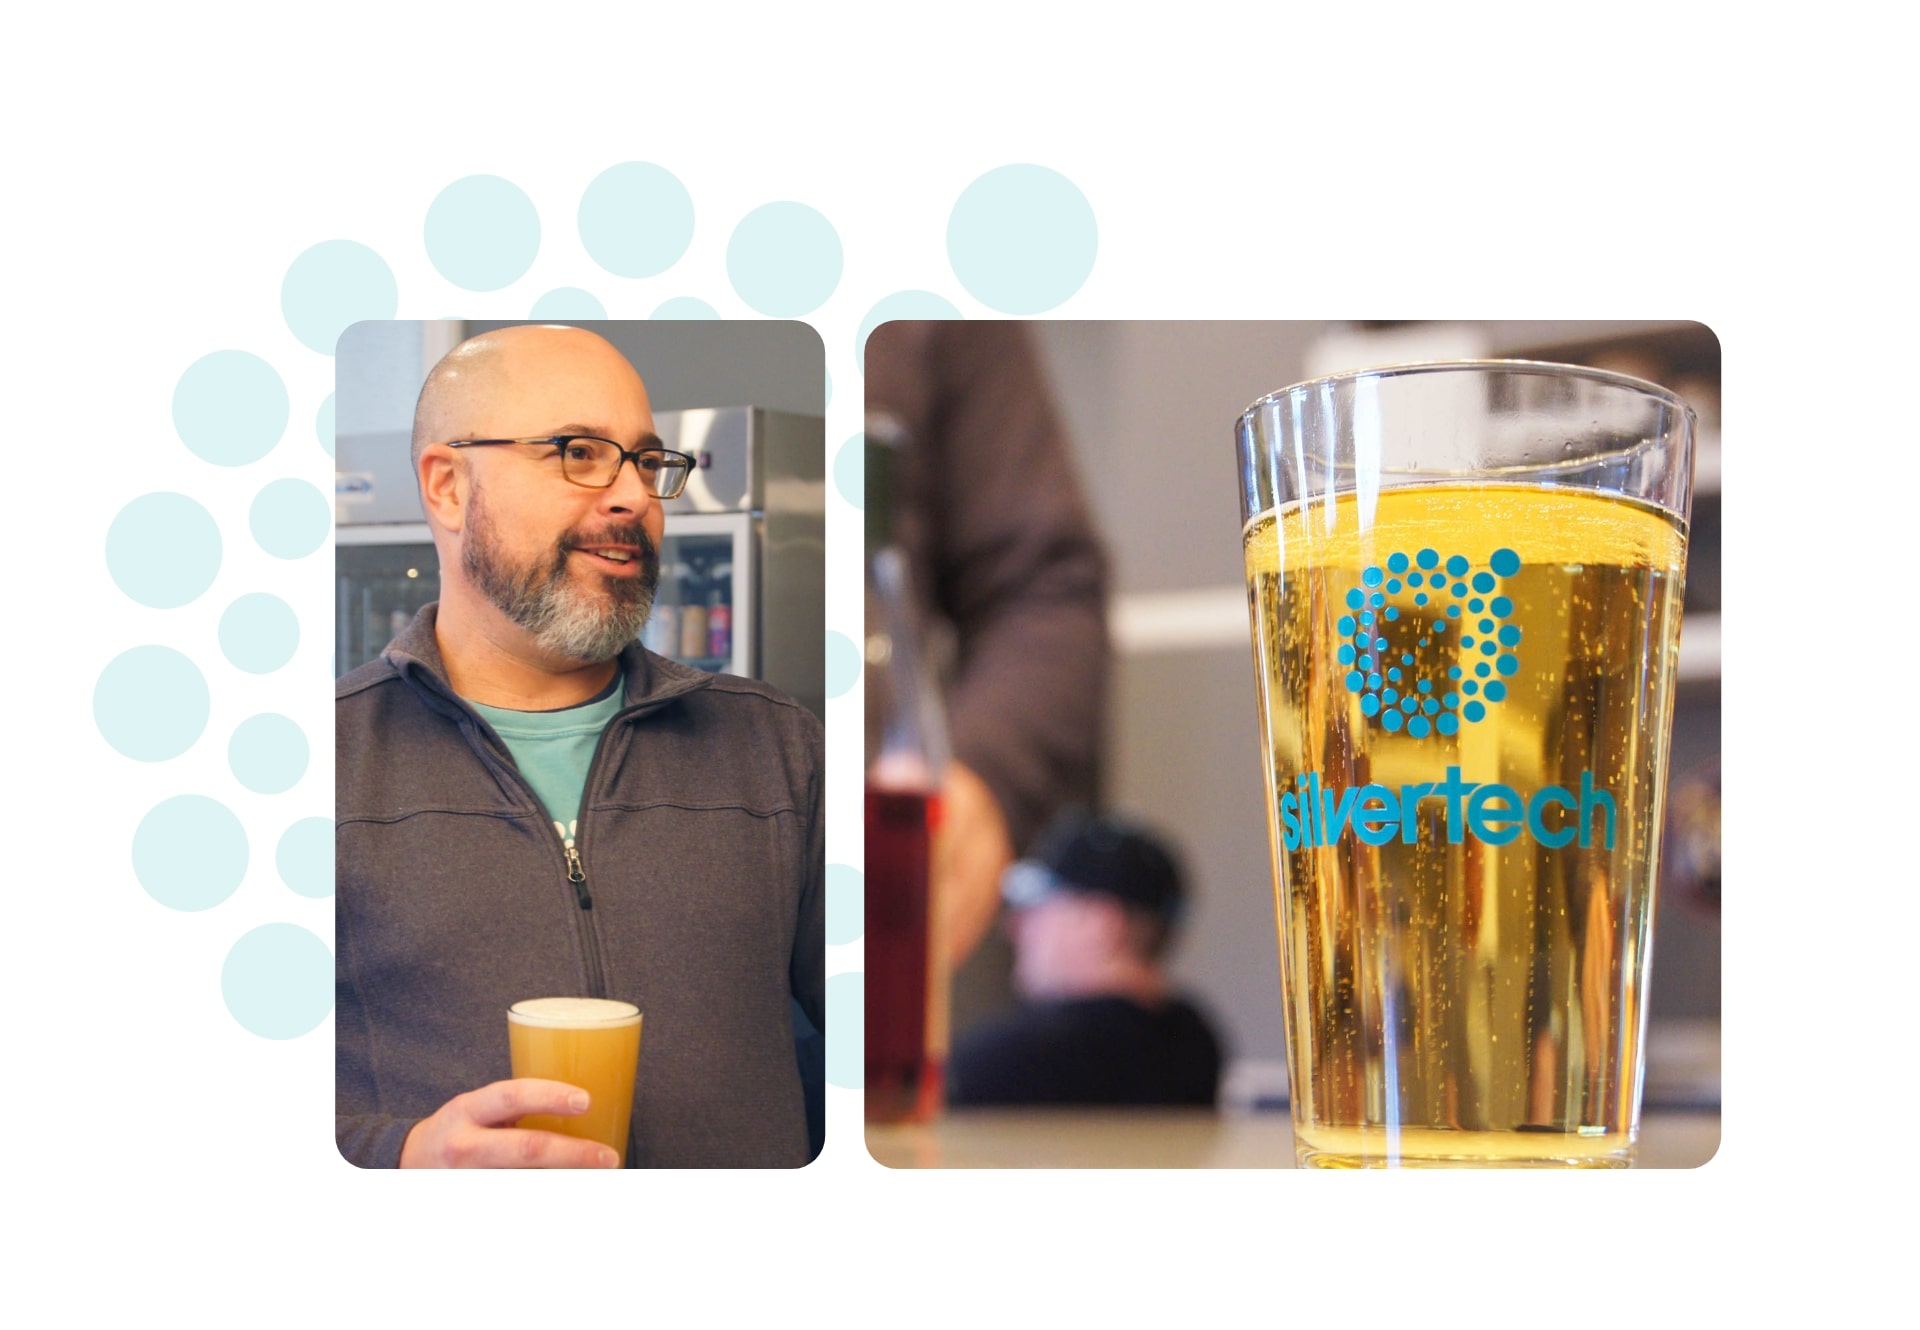 Chad holding a beer, and another image of a beer in a SilverTech branded glass